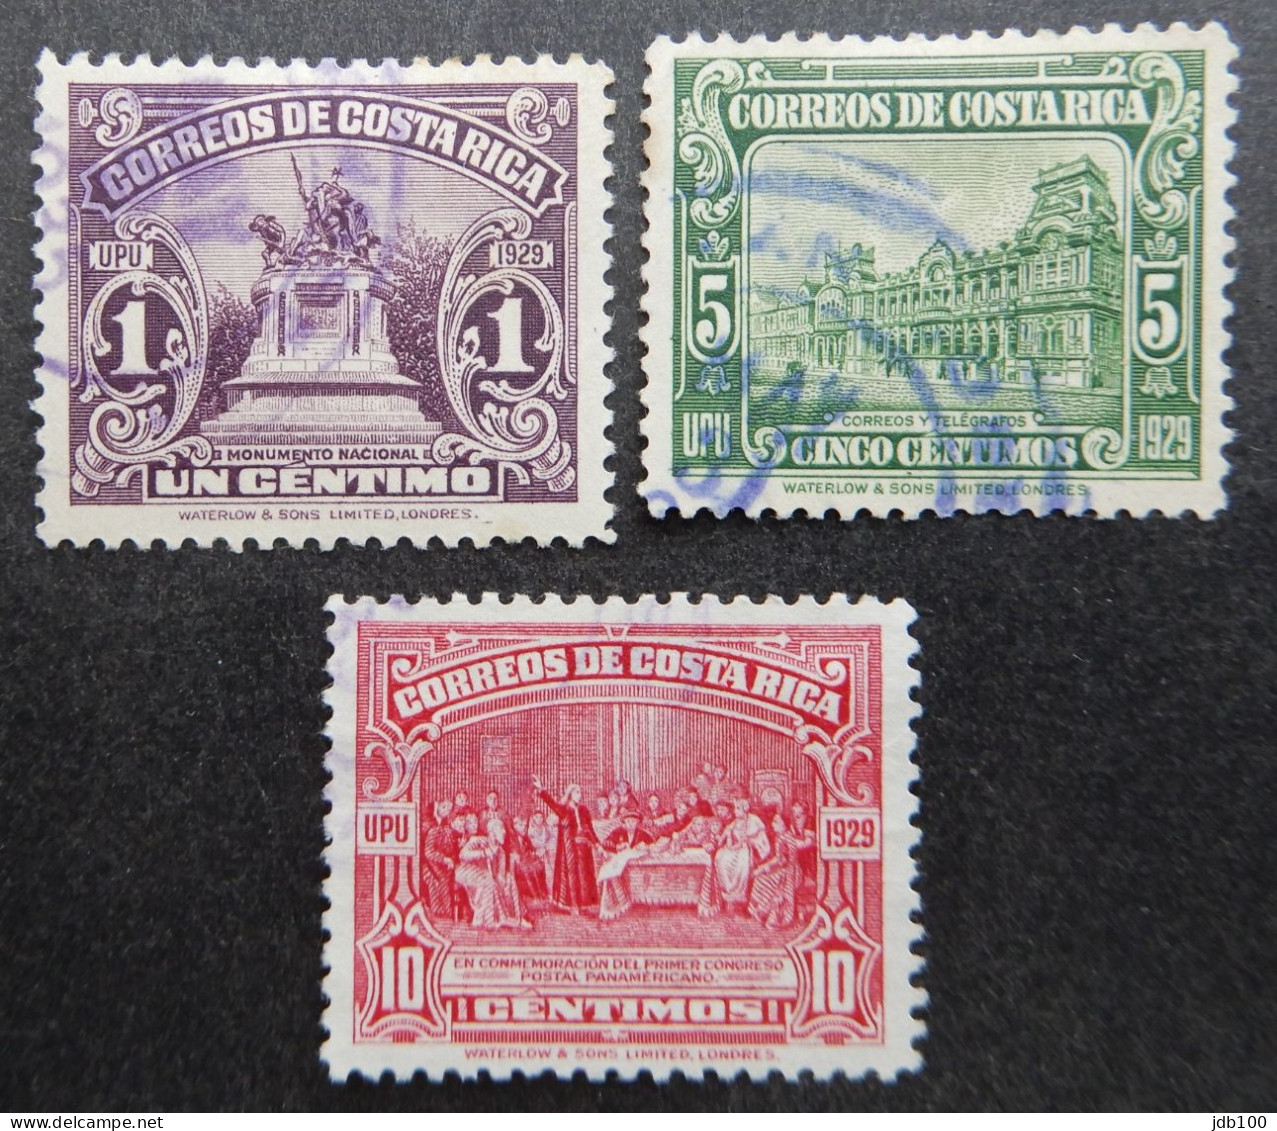 Costa Rica 1930 (1) Issue Of 1923 Reduced In Size And Date "1929" - Costa Rica